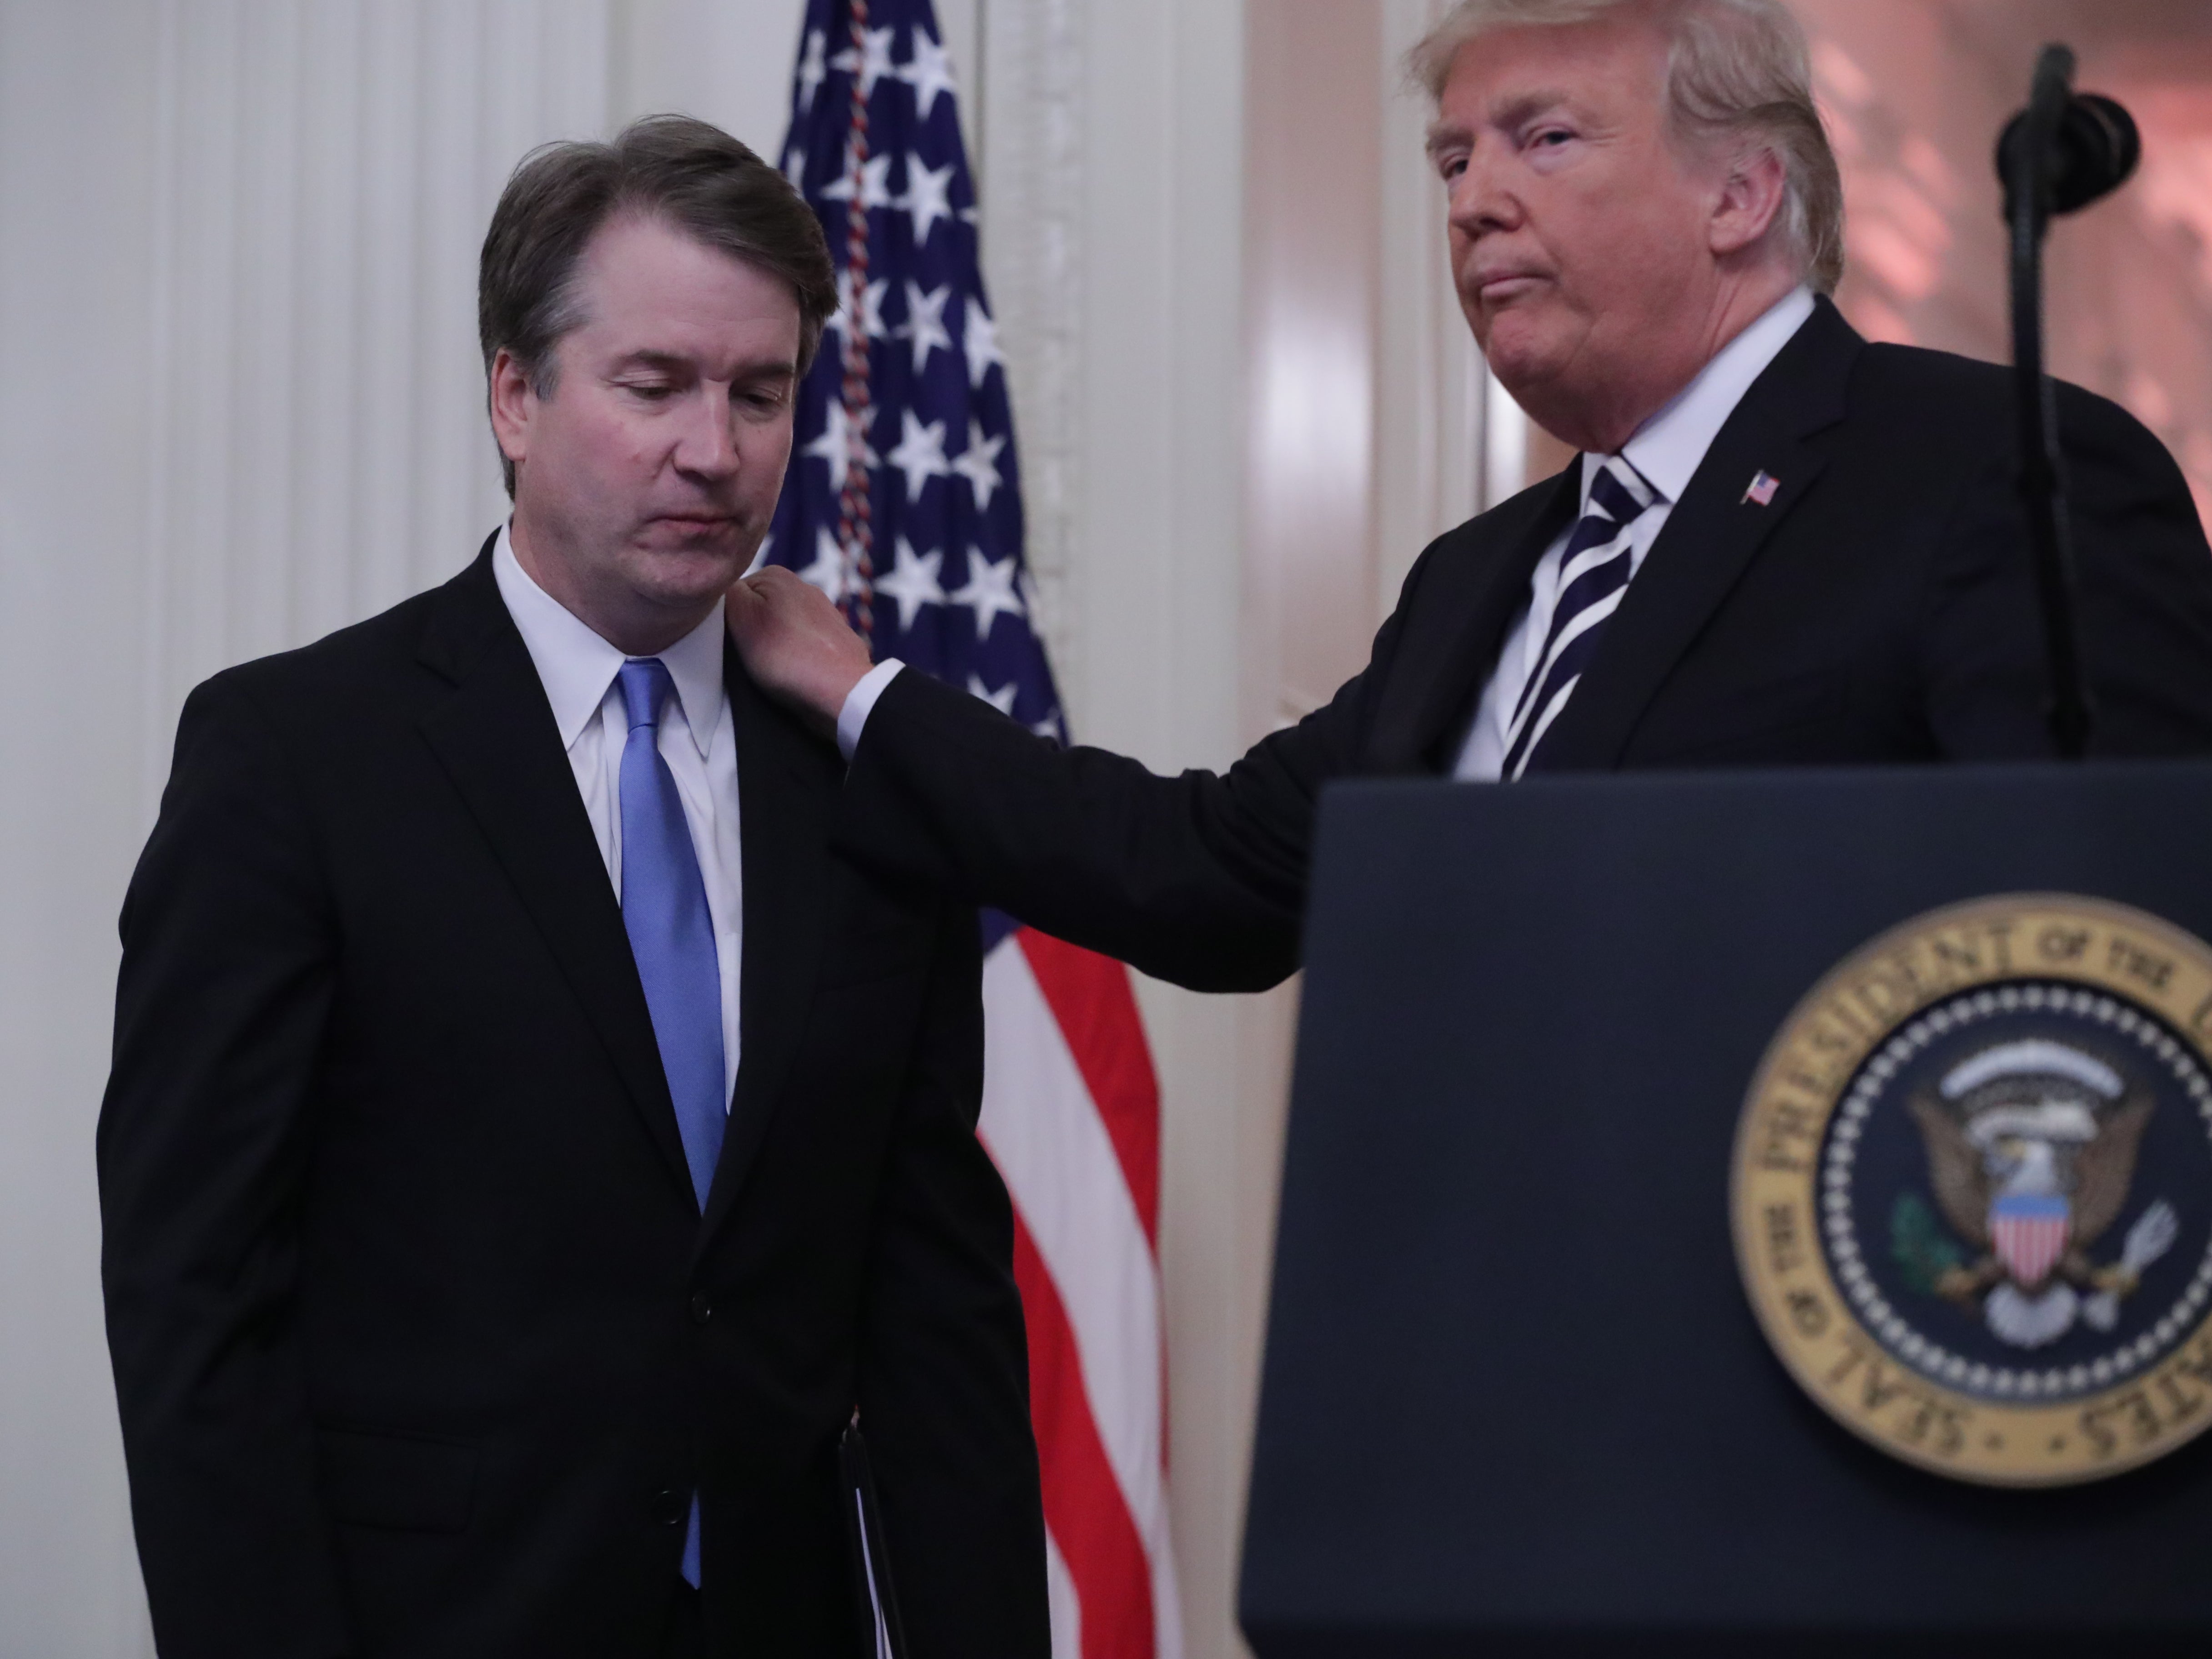 US Supreme Court Justice Brett Kavanaugh is greeted by President Donald Trump at the justice’s ceremonial swearing-in, 8 October, 2018